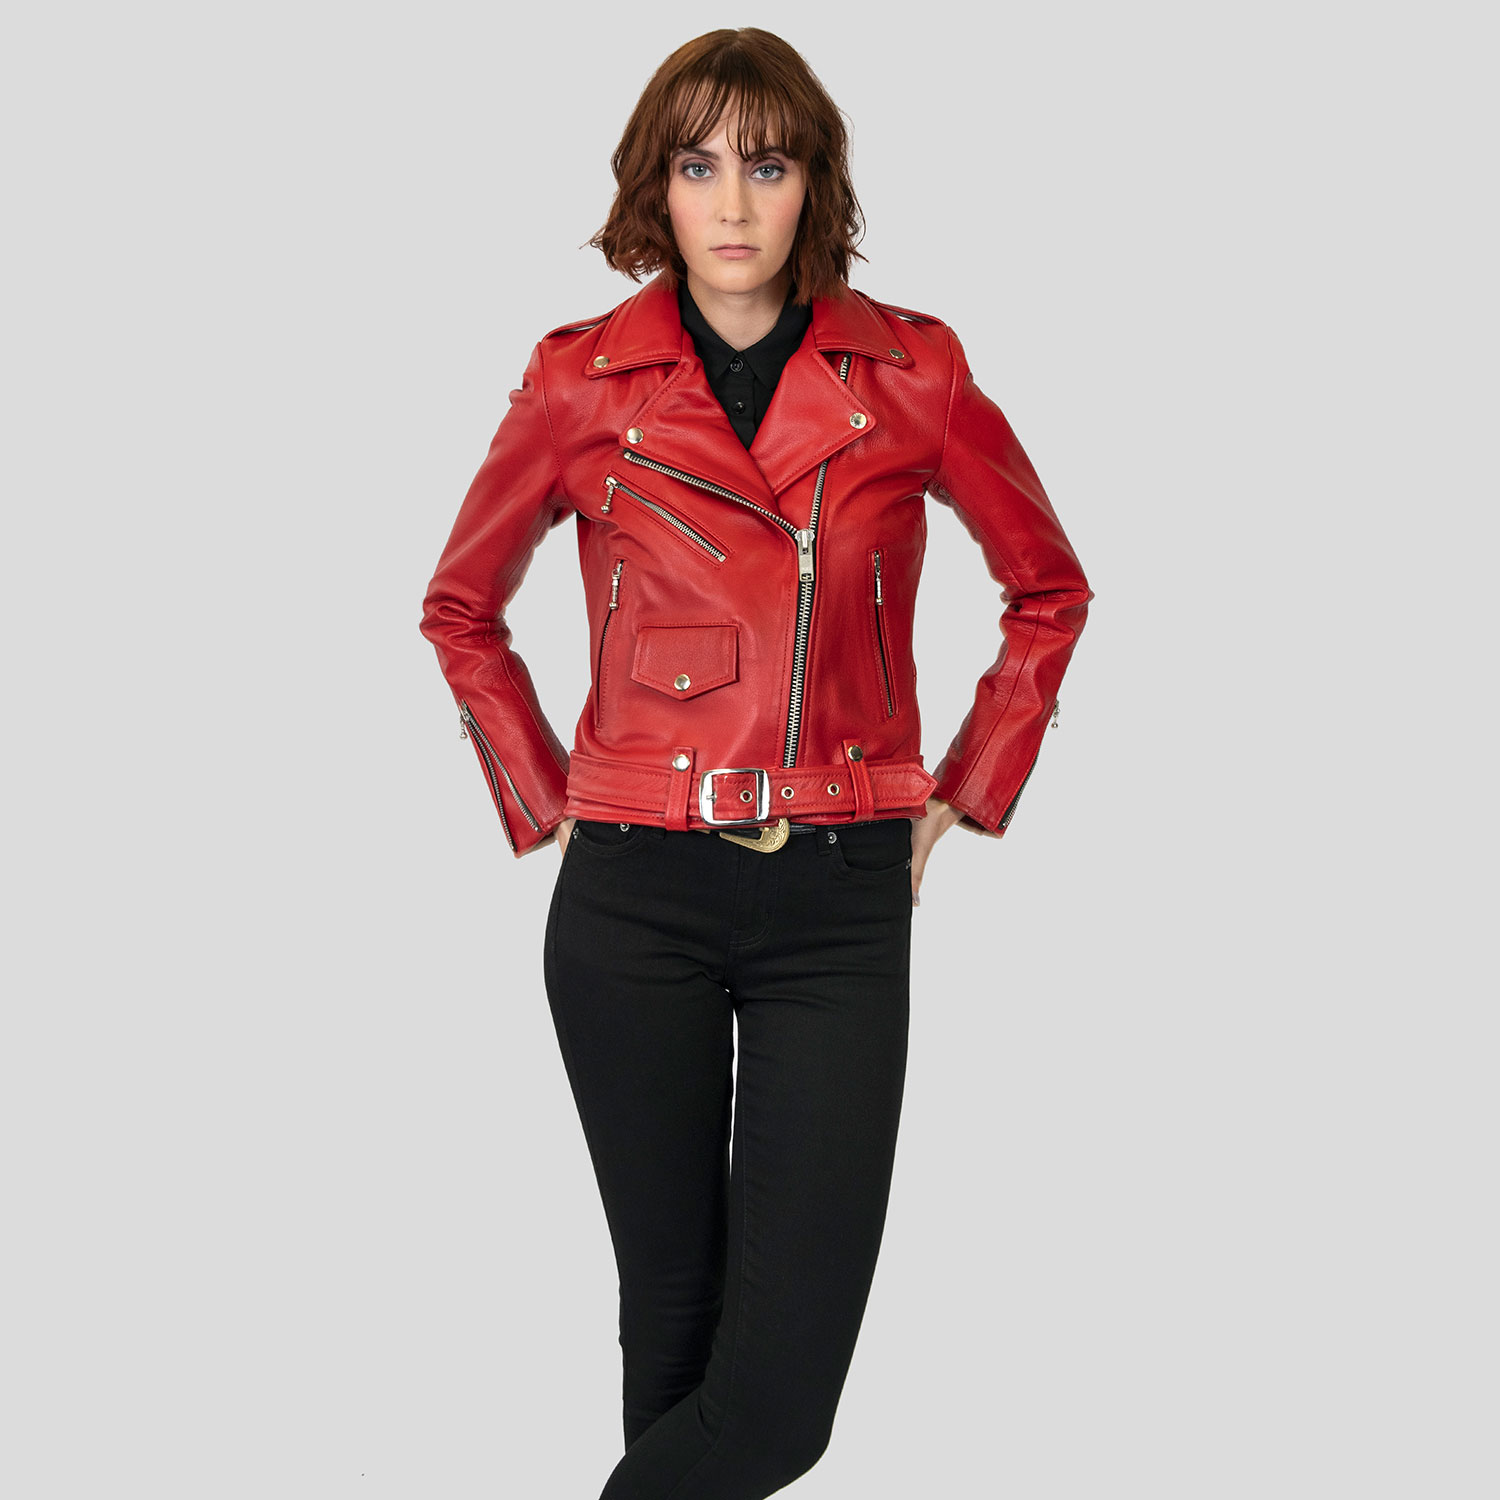 Blood Straight | Apparel Hell Jacket Commando Red Leather To -